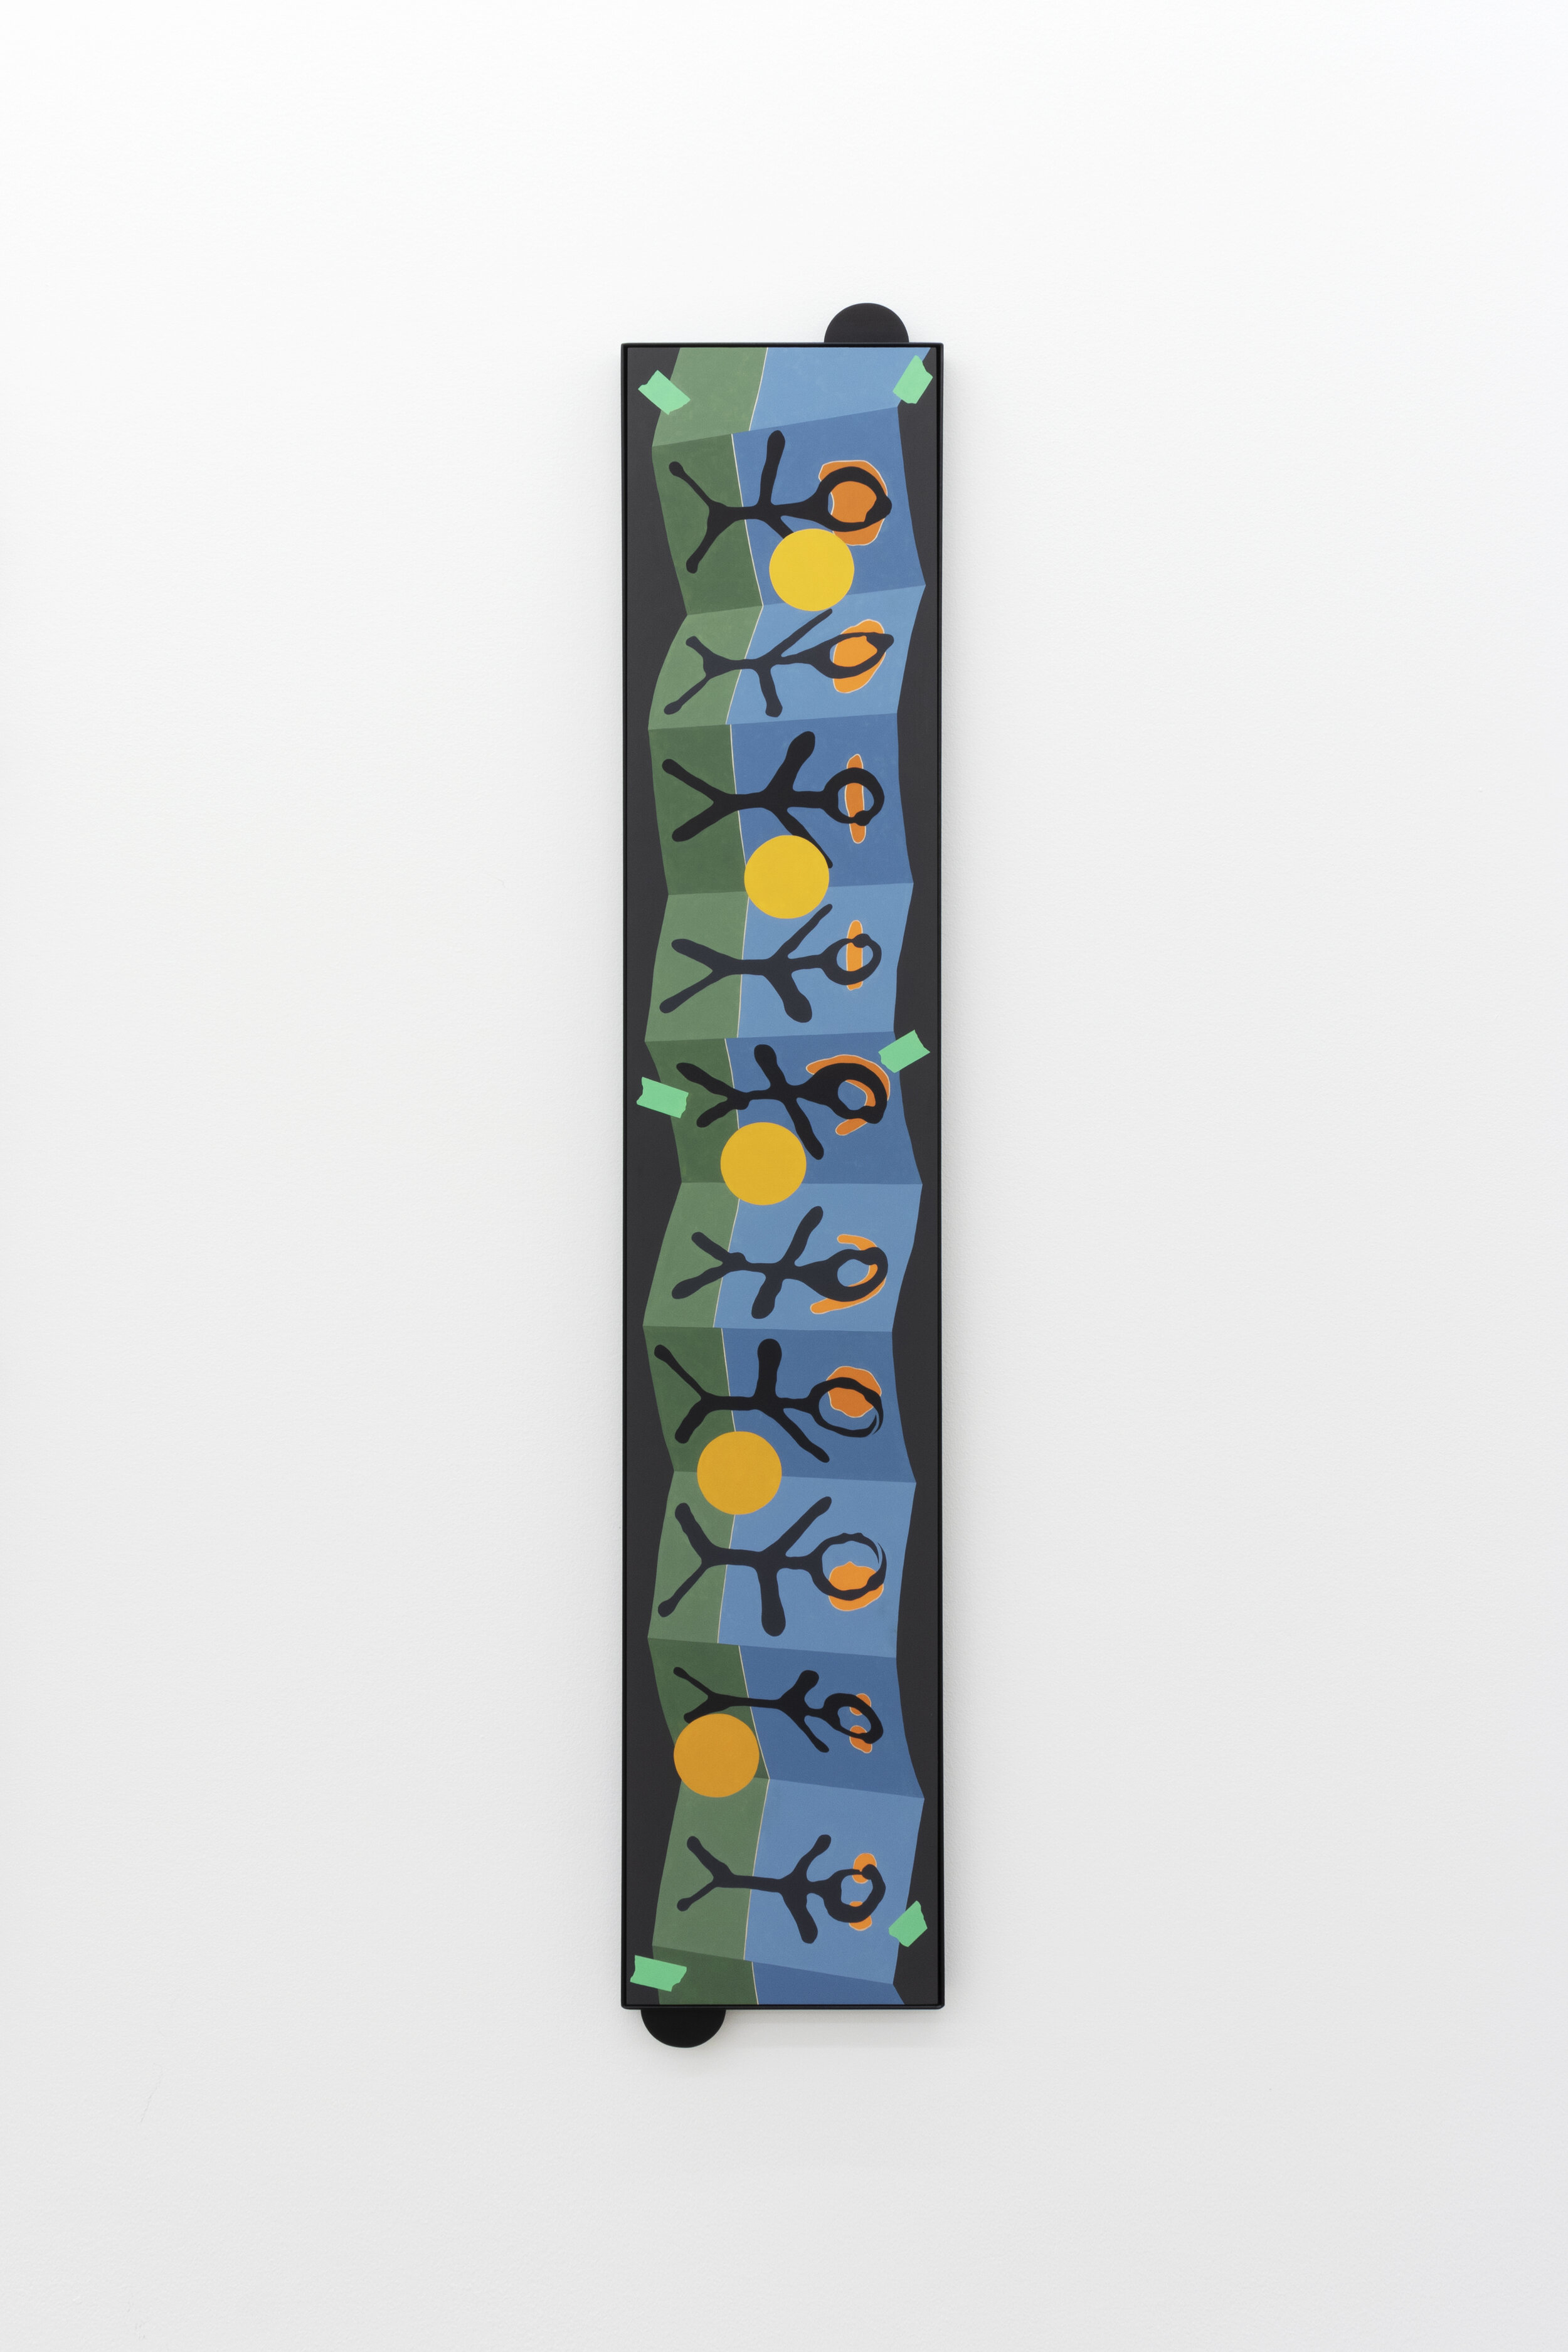  Vanessa Maltese    Hypothesizing coincidence no. 2 , 2020   Oil on panel, powder coated steel, wood, magnets   60.25 x 11.25 in  